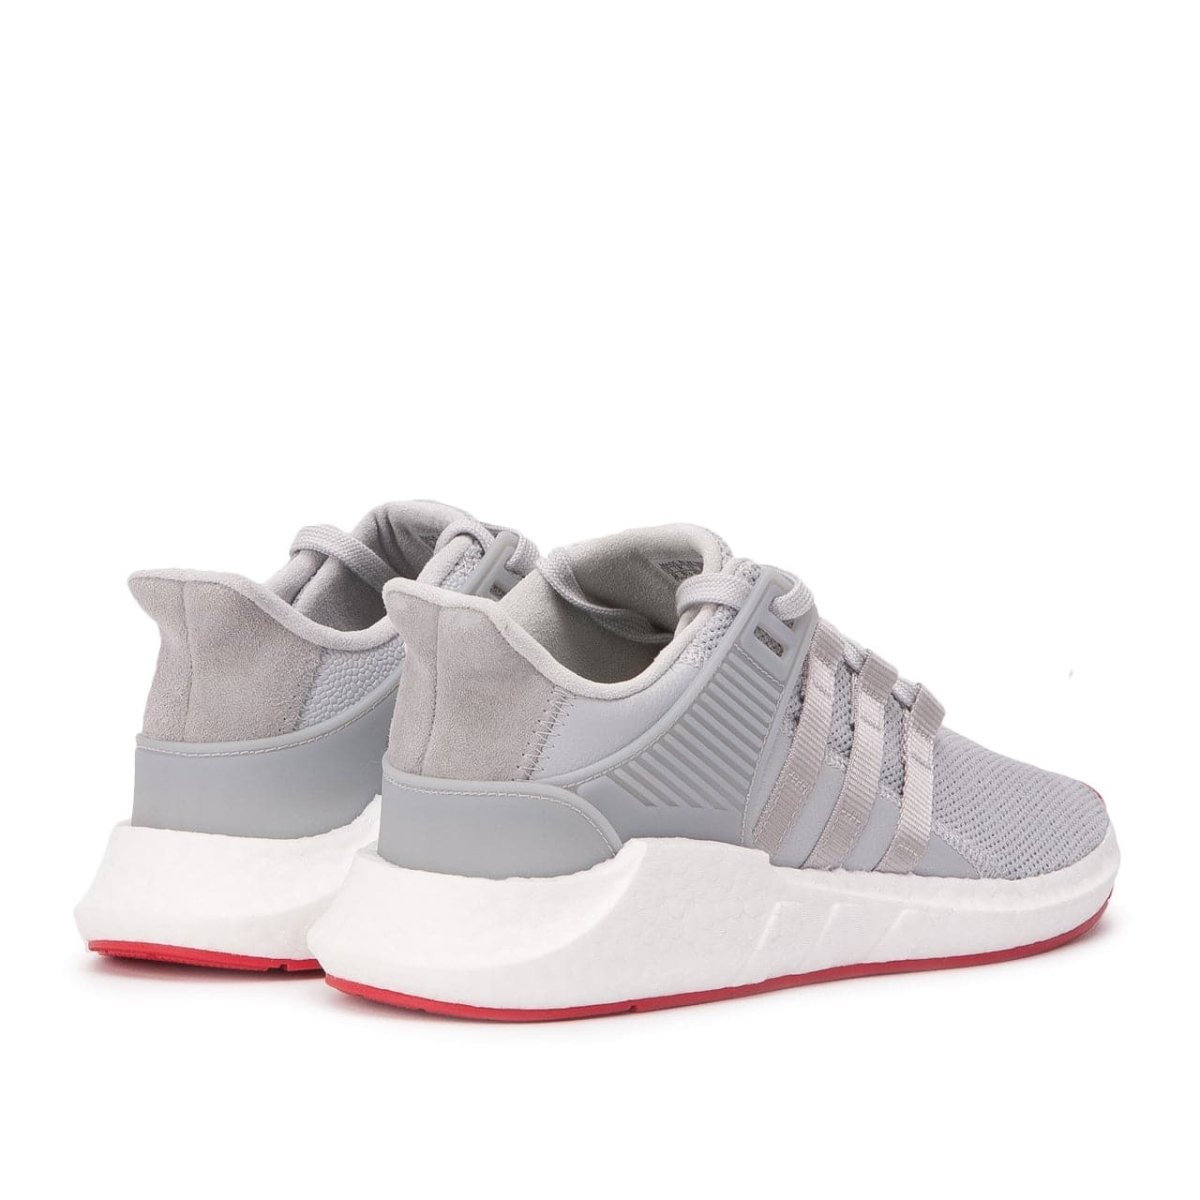 Ministerio réplica habilitar adidas EQT Support 93/17 Boost 'Red Carpet Pack' (Silver / White / Red)  CQ2393 – Allike Store